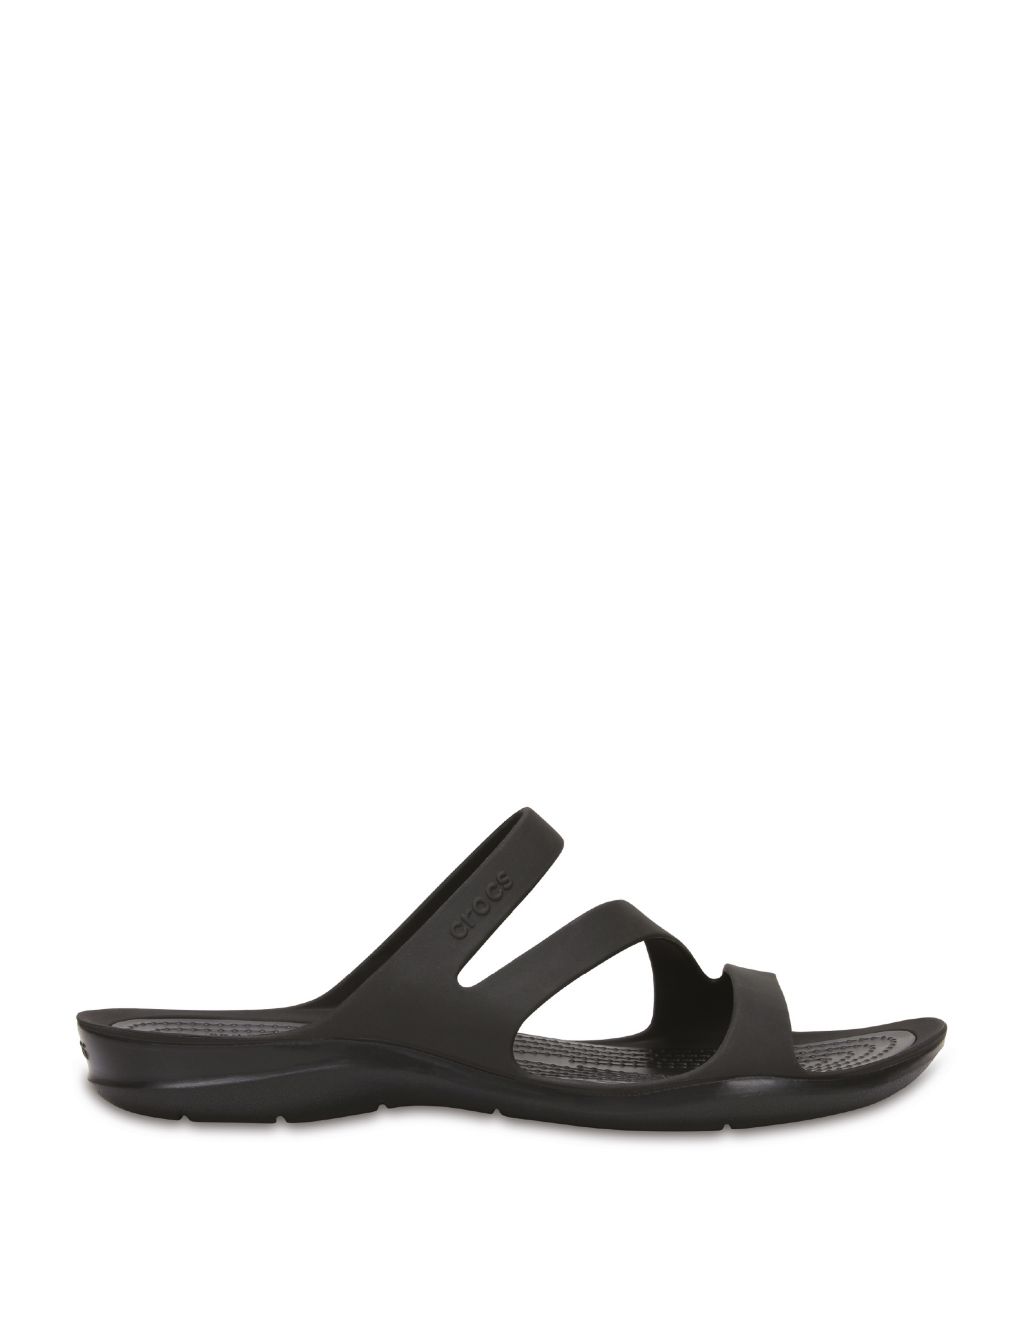 Swiftwater™ Strappy Sliders